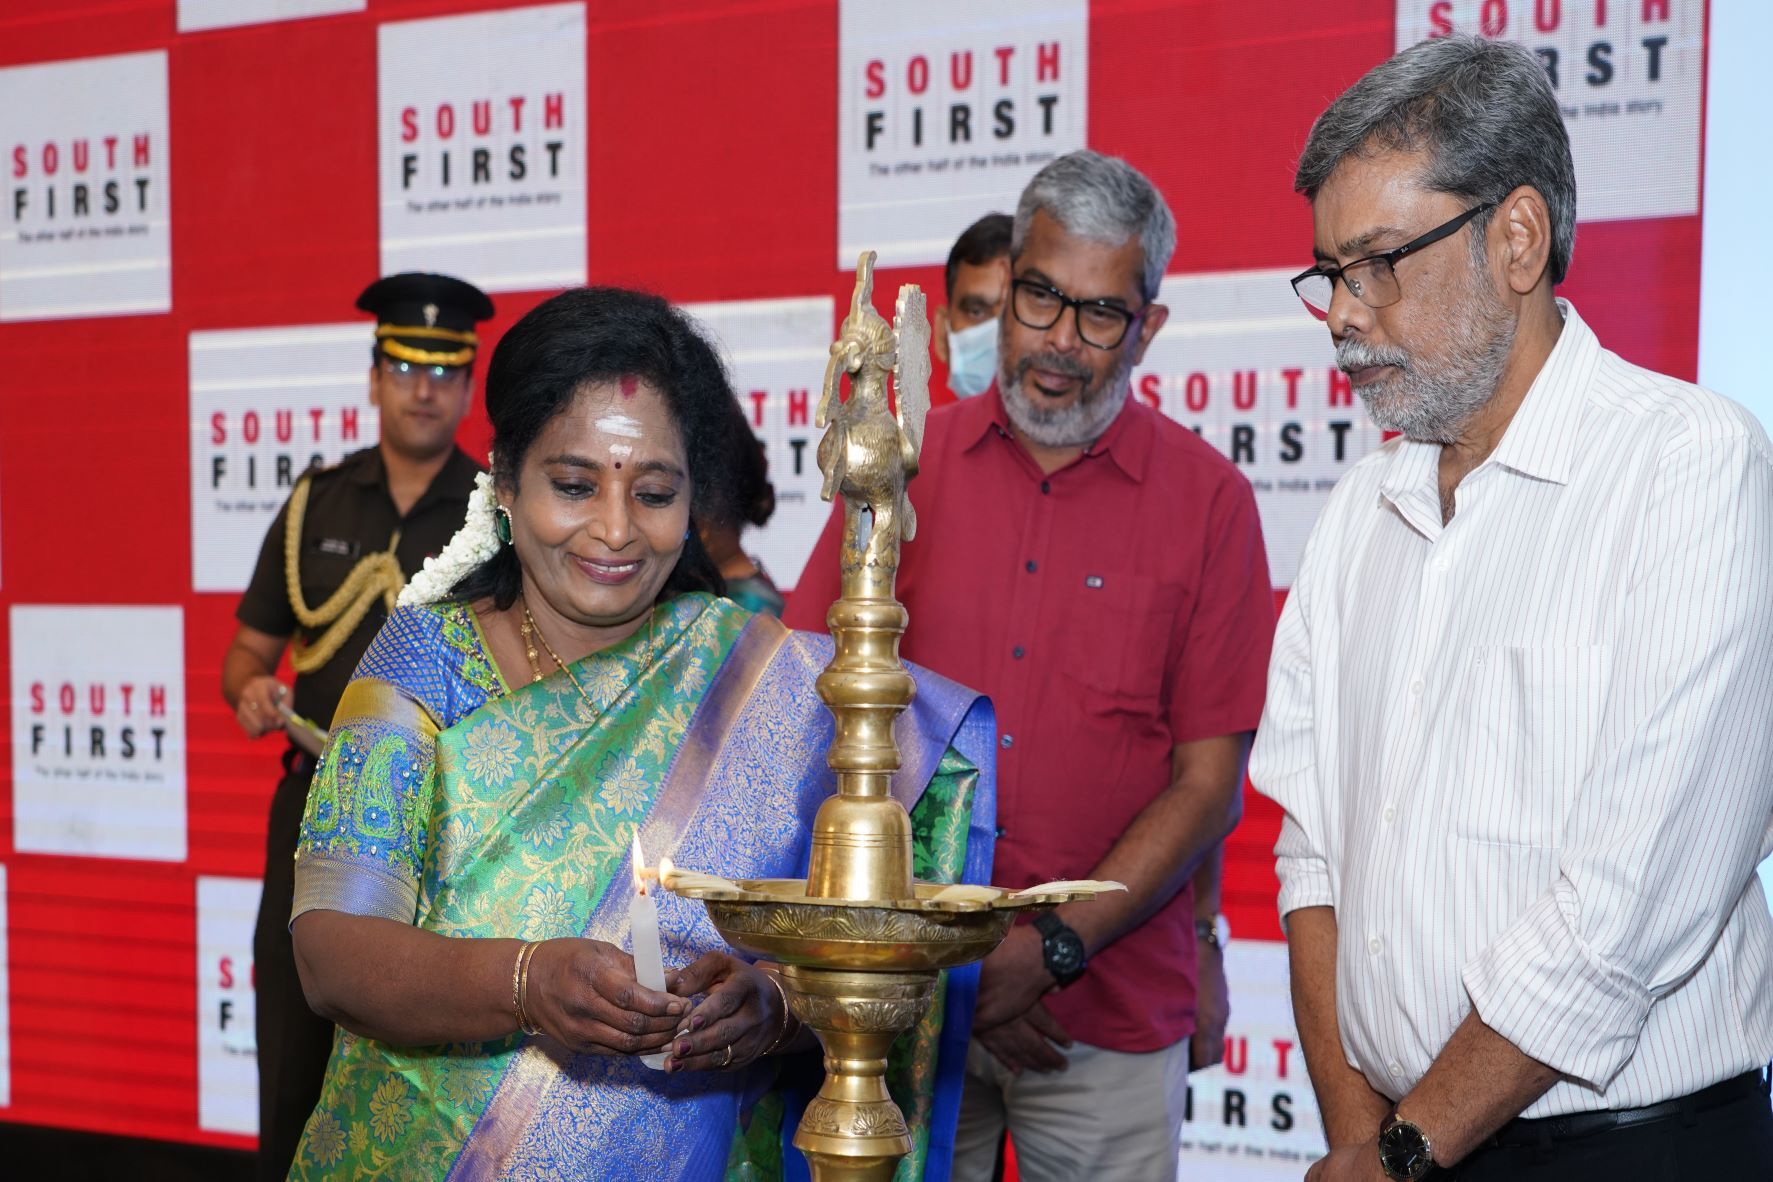 Telangana Governor Dr Tamilisai Soundararajan lighting the lamp at the launch of South First news portal on Saturday, 17 September in Hyderabad. (South First)